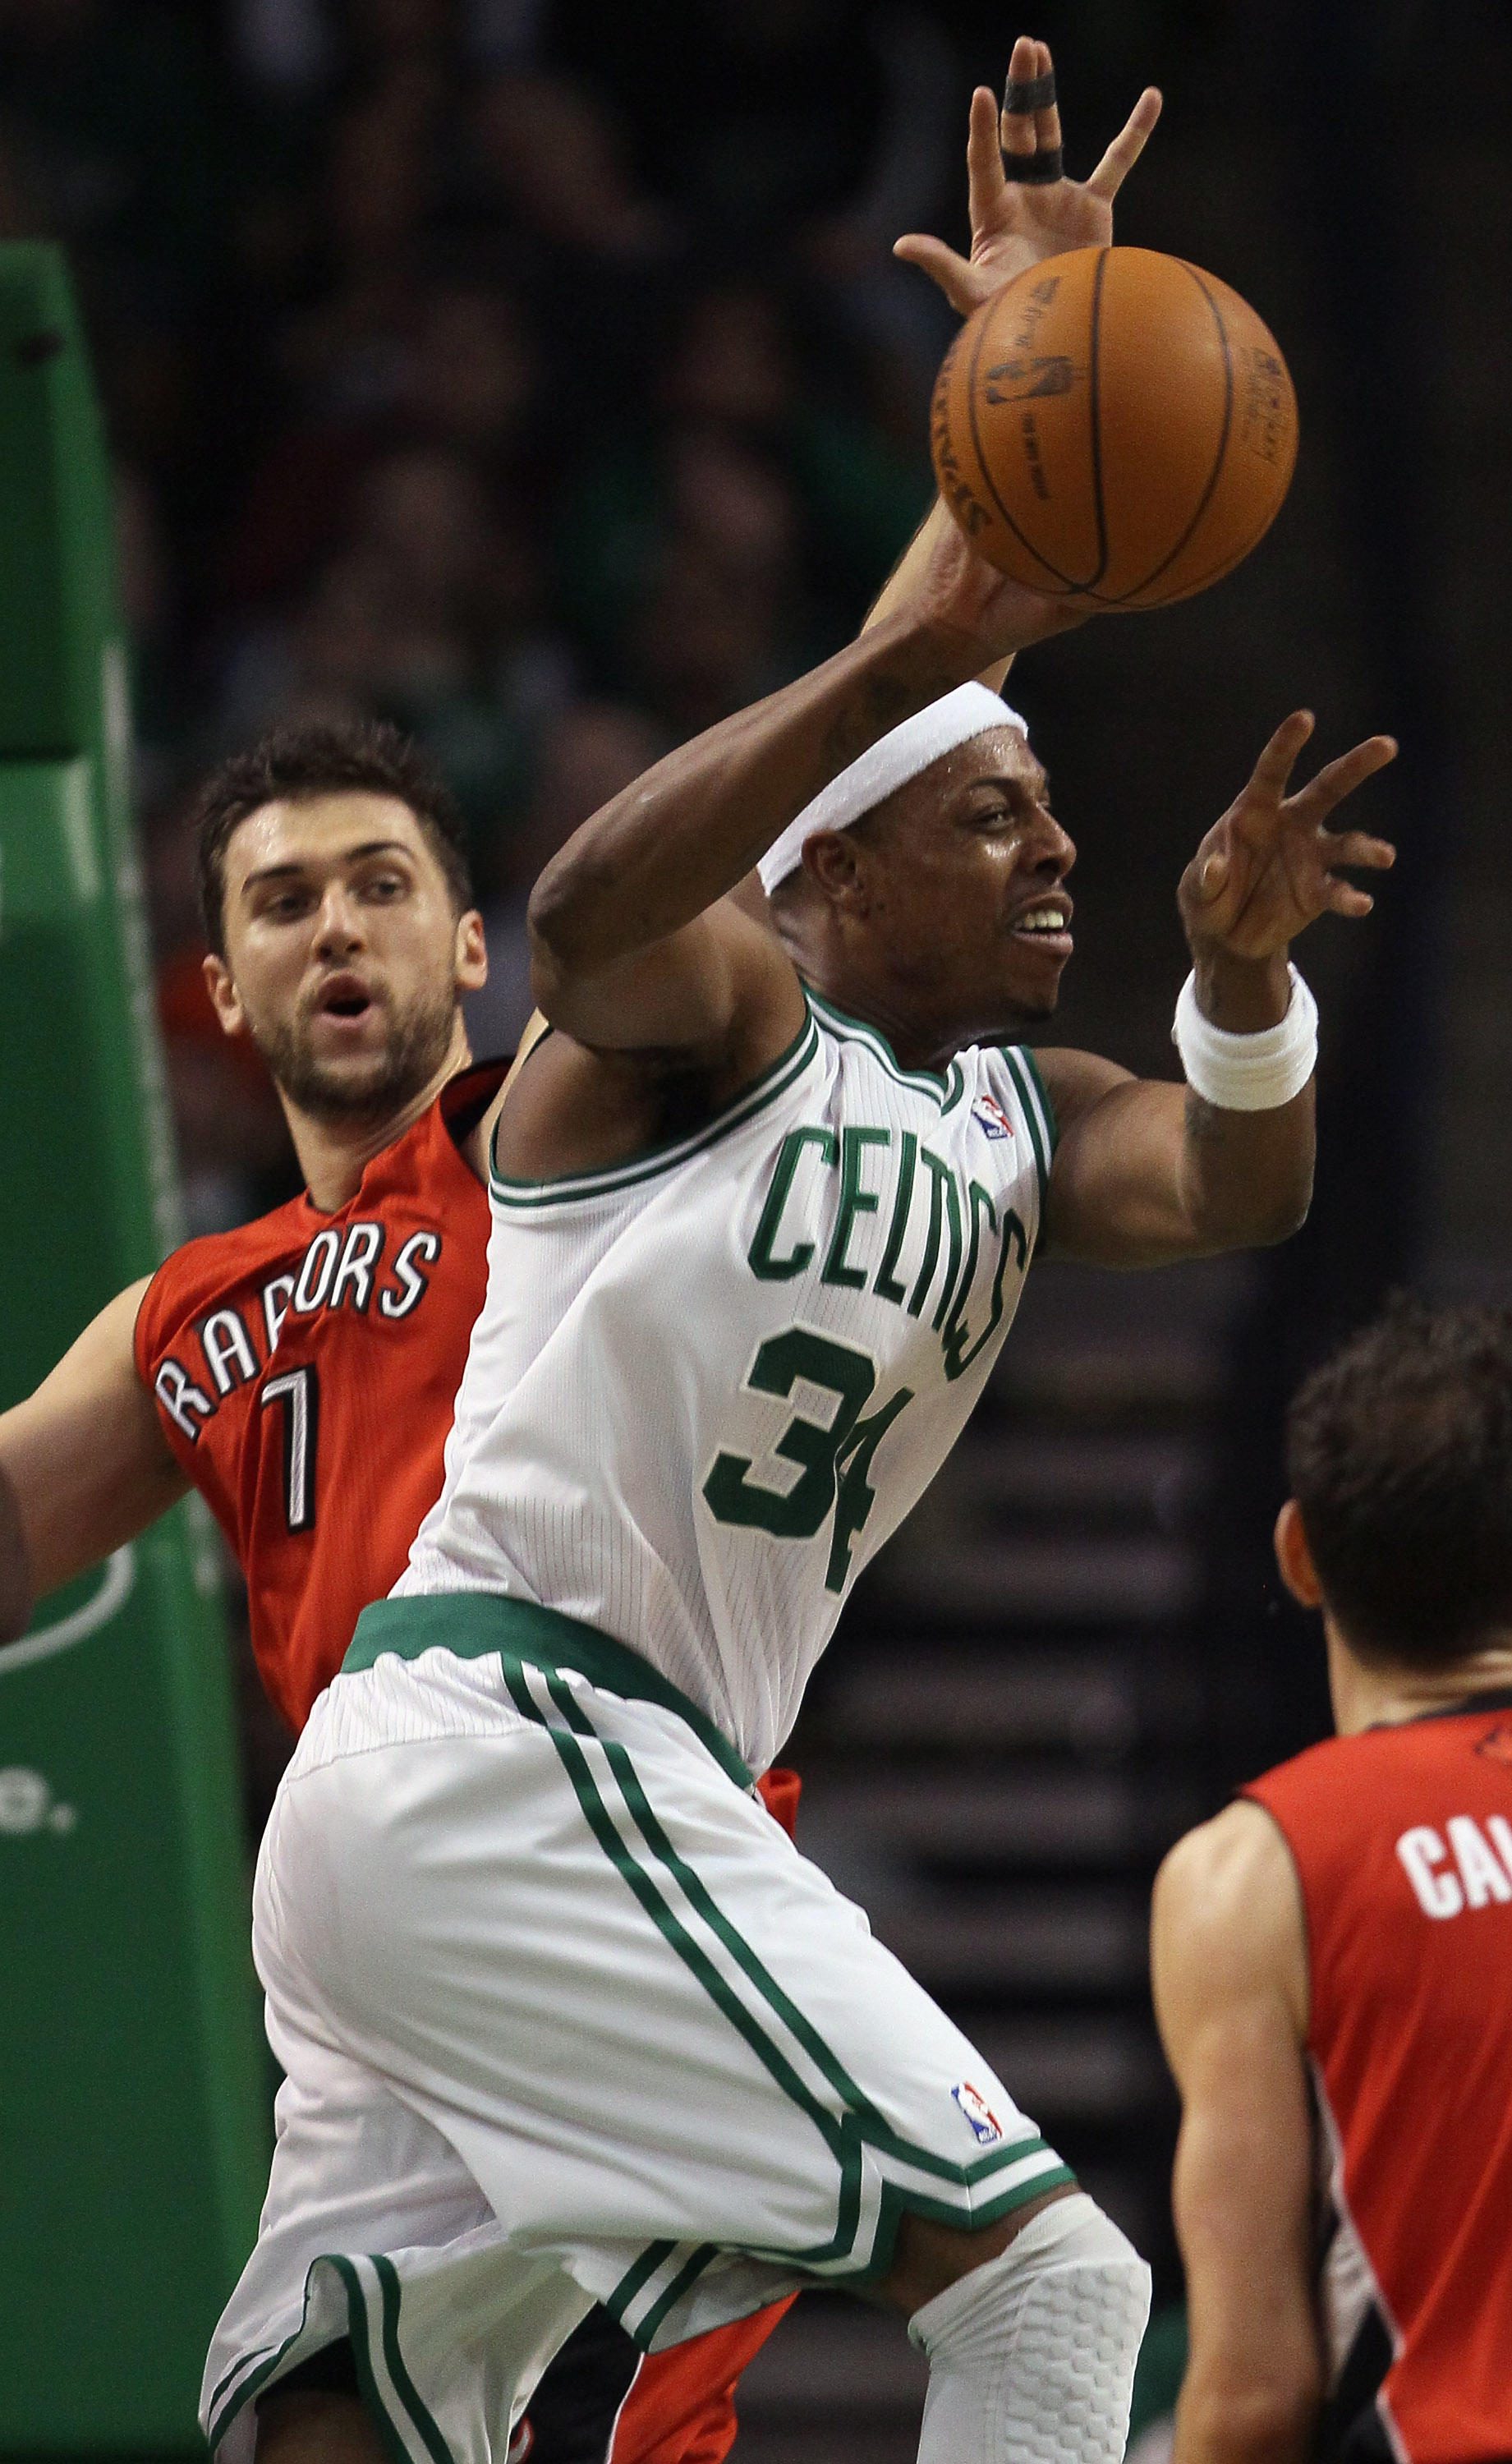 BOSTON, MA - JANUARY 07:  Paul Pierce #34 of the Boston Celtics passes the ball as Andrea Bargnani #7 of the Toronto Raptors defends on January 7, 2011 at the TD Garden in Boston, Massachusetts. The Celtics defeated the Raptors 122-102. NOTE TO USER: User